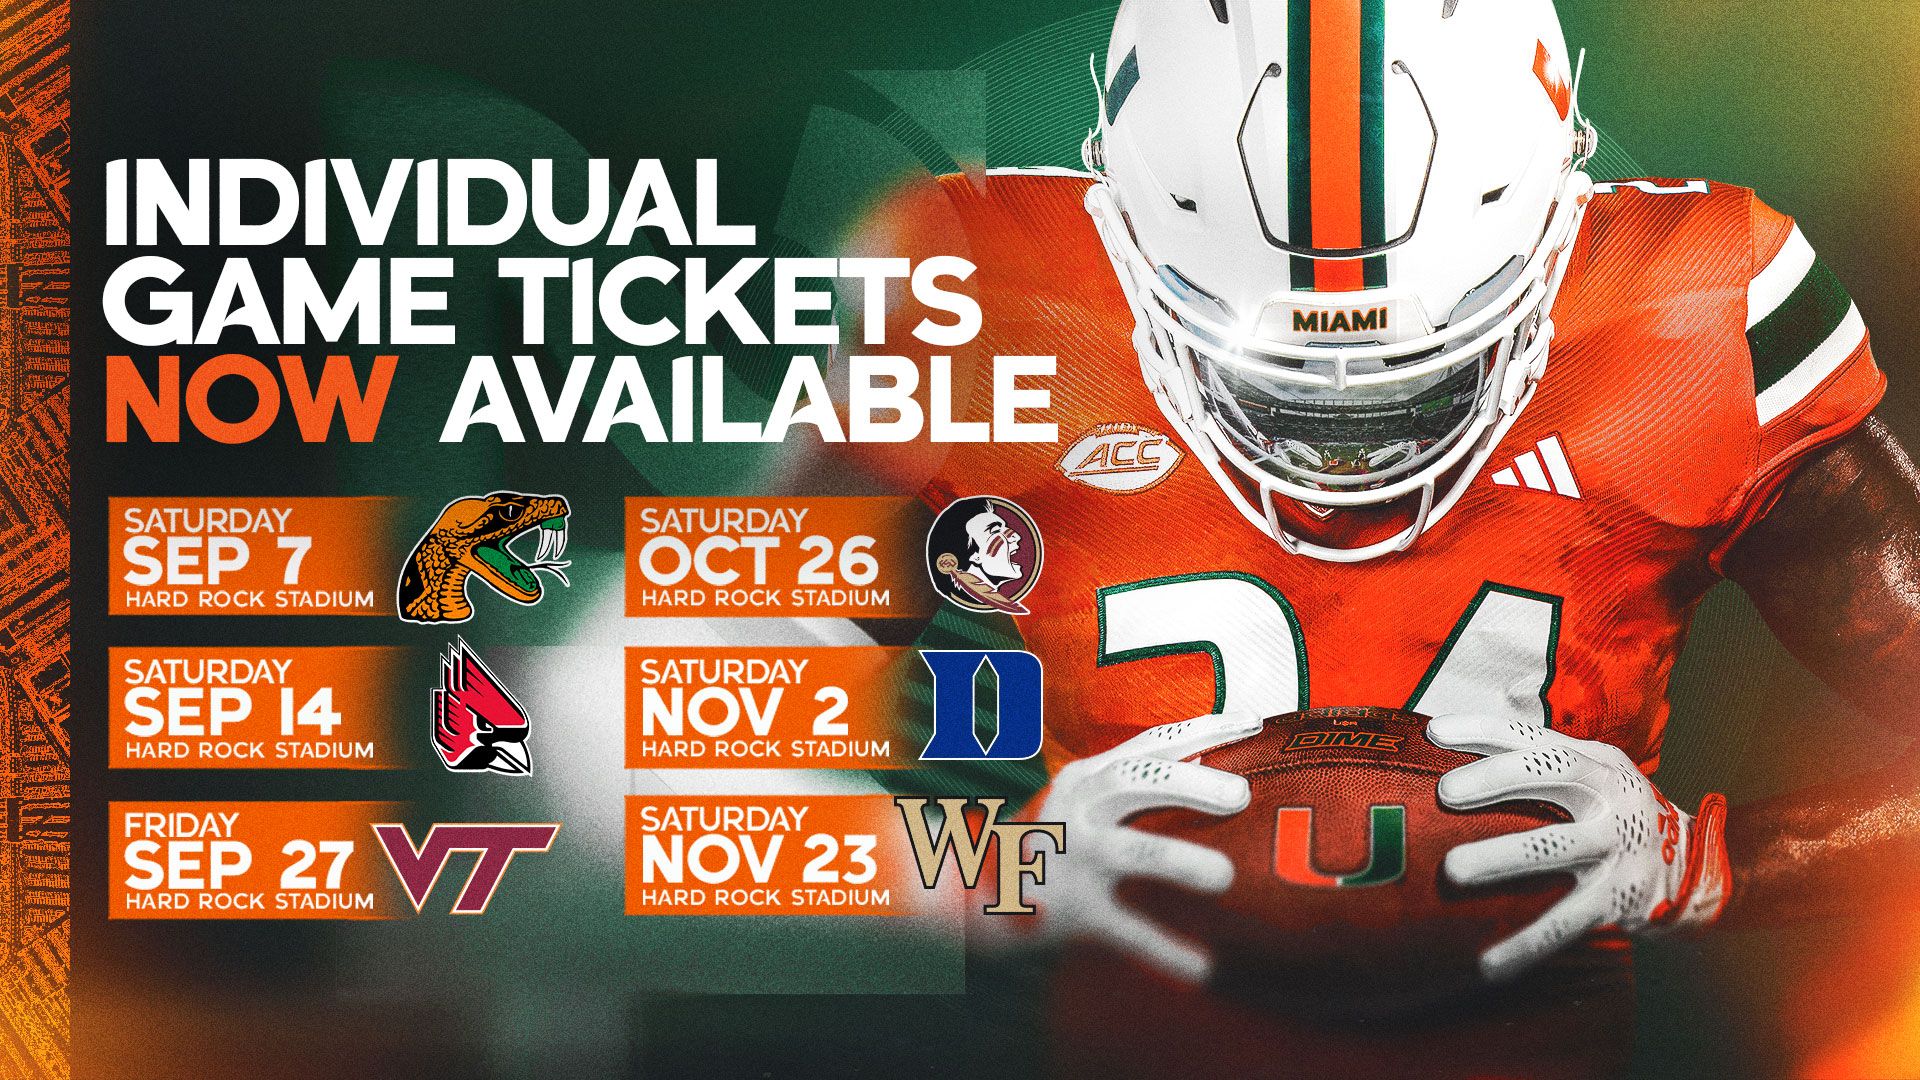 Individual Game Tickets Now Available!